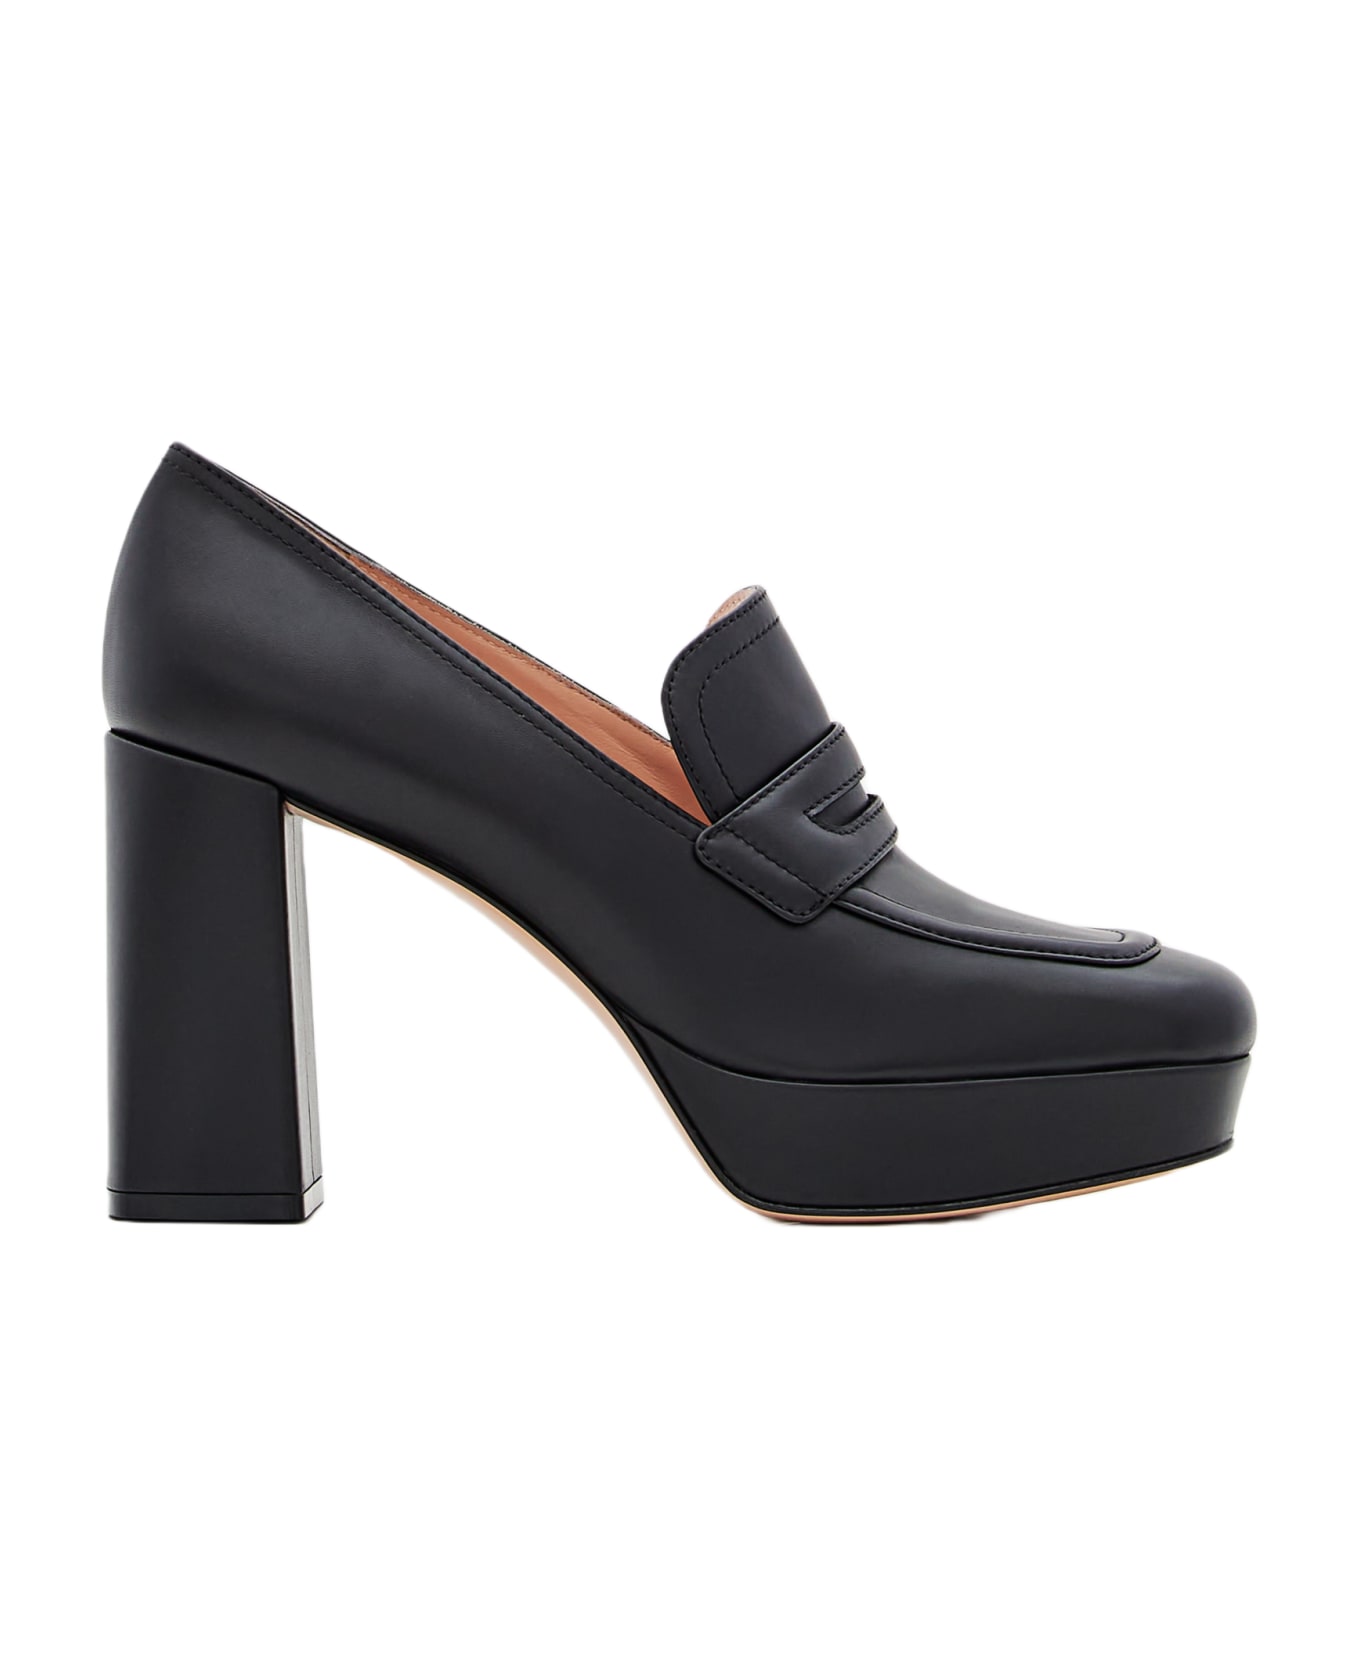 Gianvito Rossi Rouen Heeled Leather Loafers - Black ハイヒール